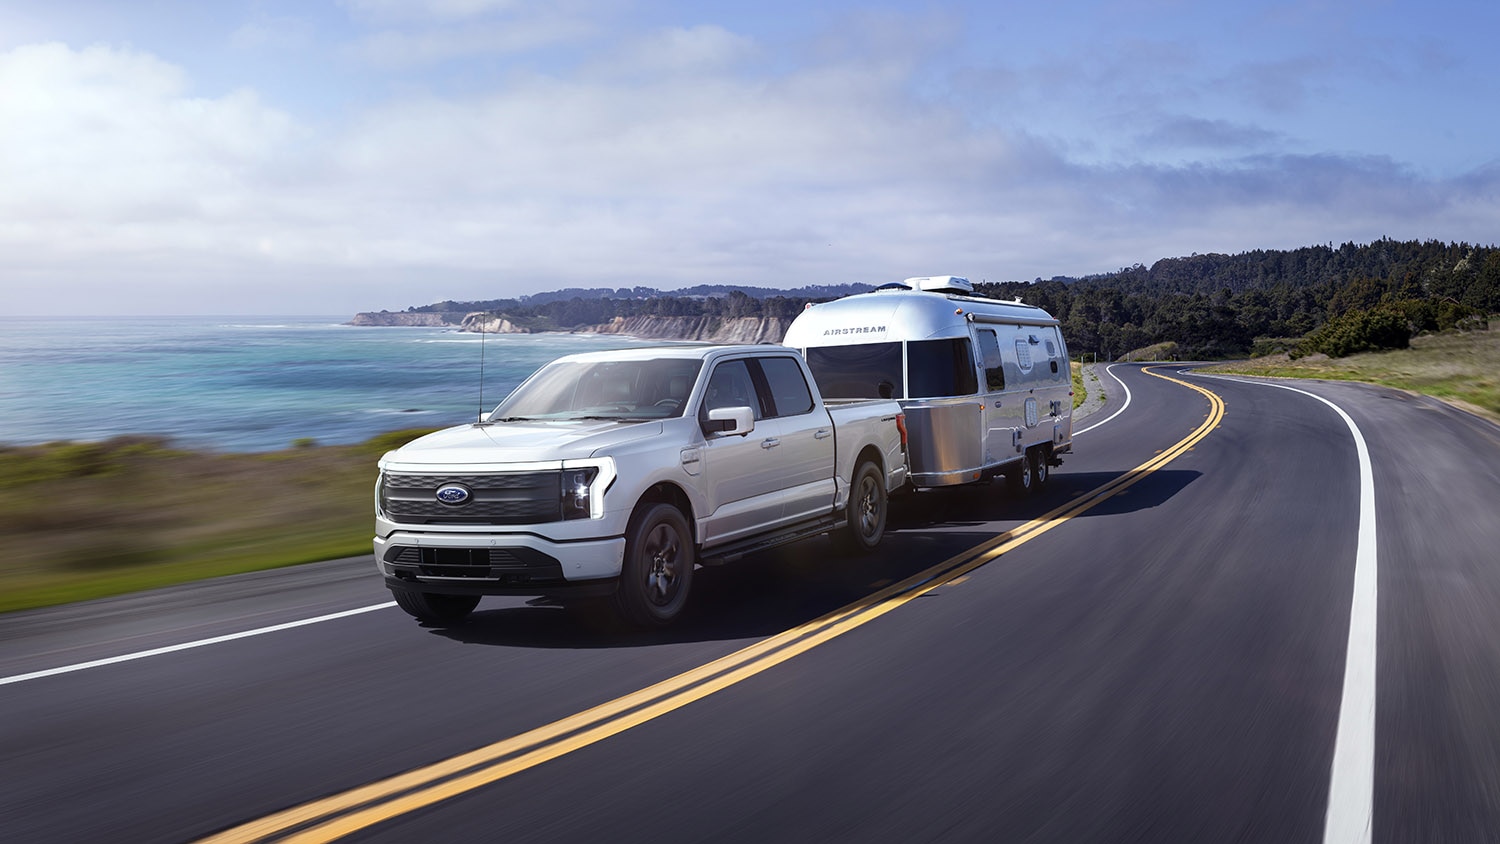 Ford F-150 Lightning EV in white tows a large Airstream camper along a coastline.